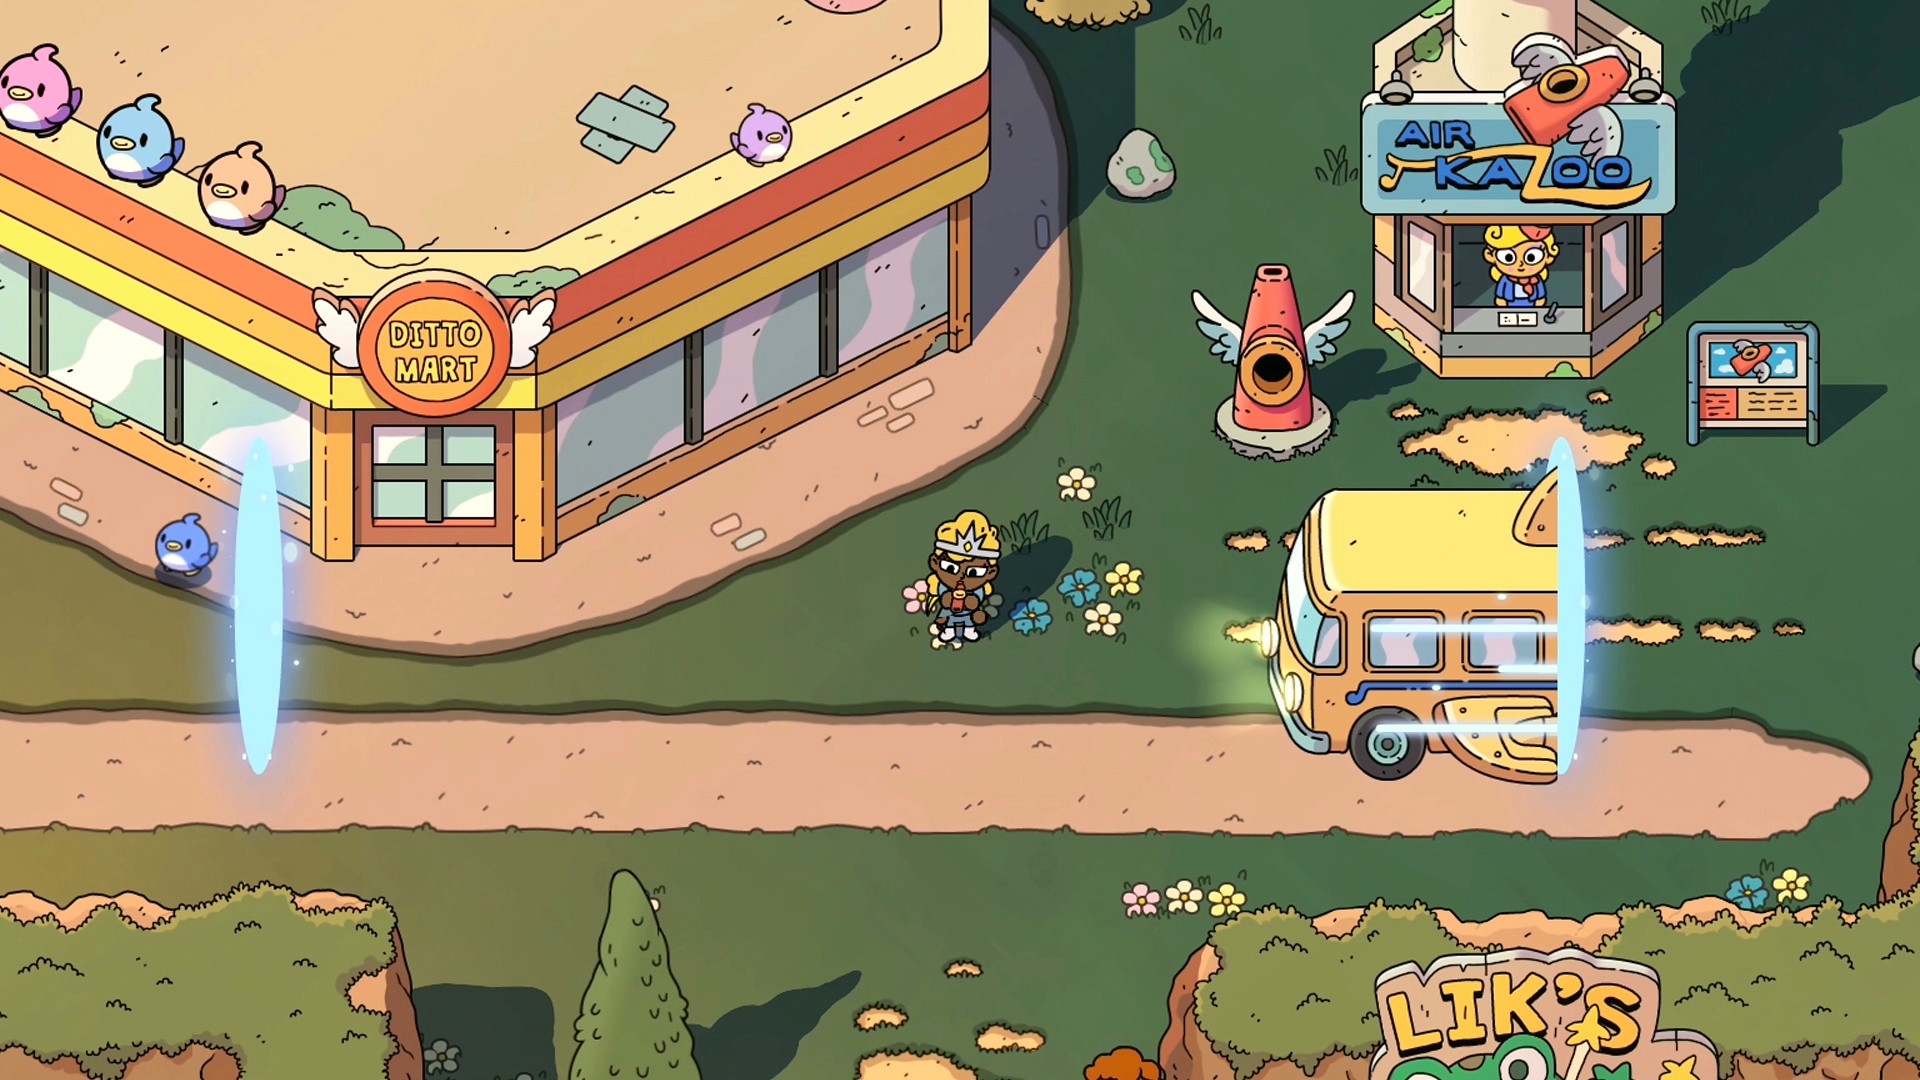 The Swords of Ditto has the best damn trailer.